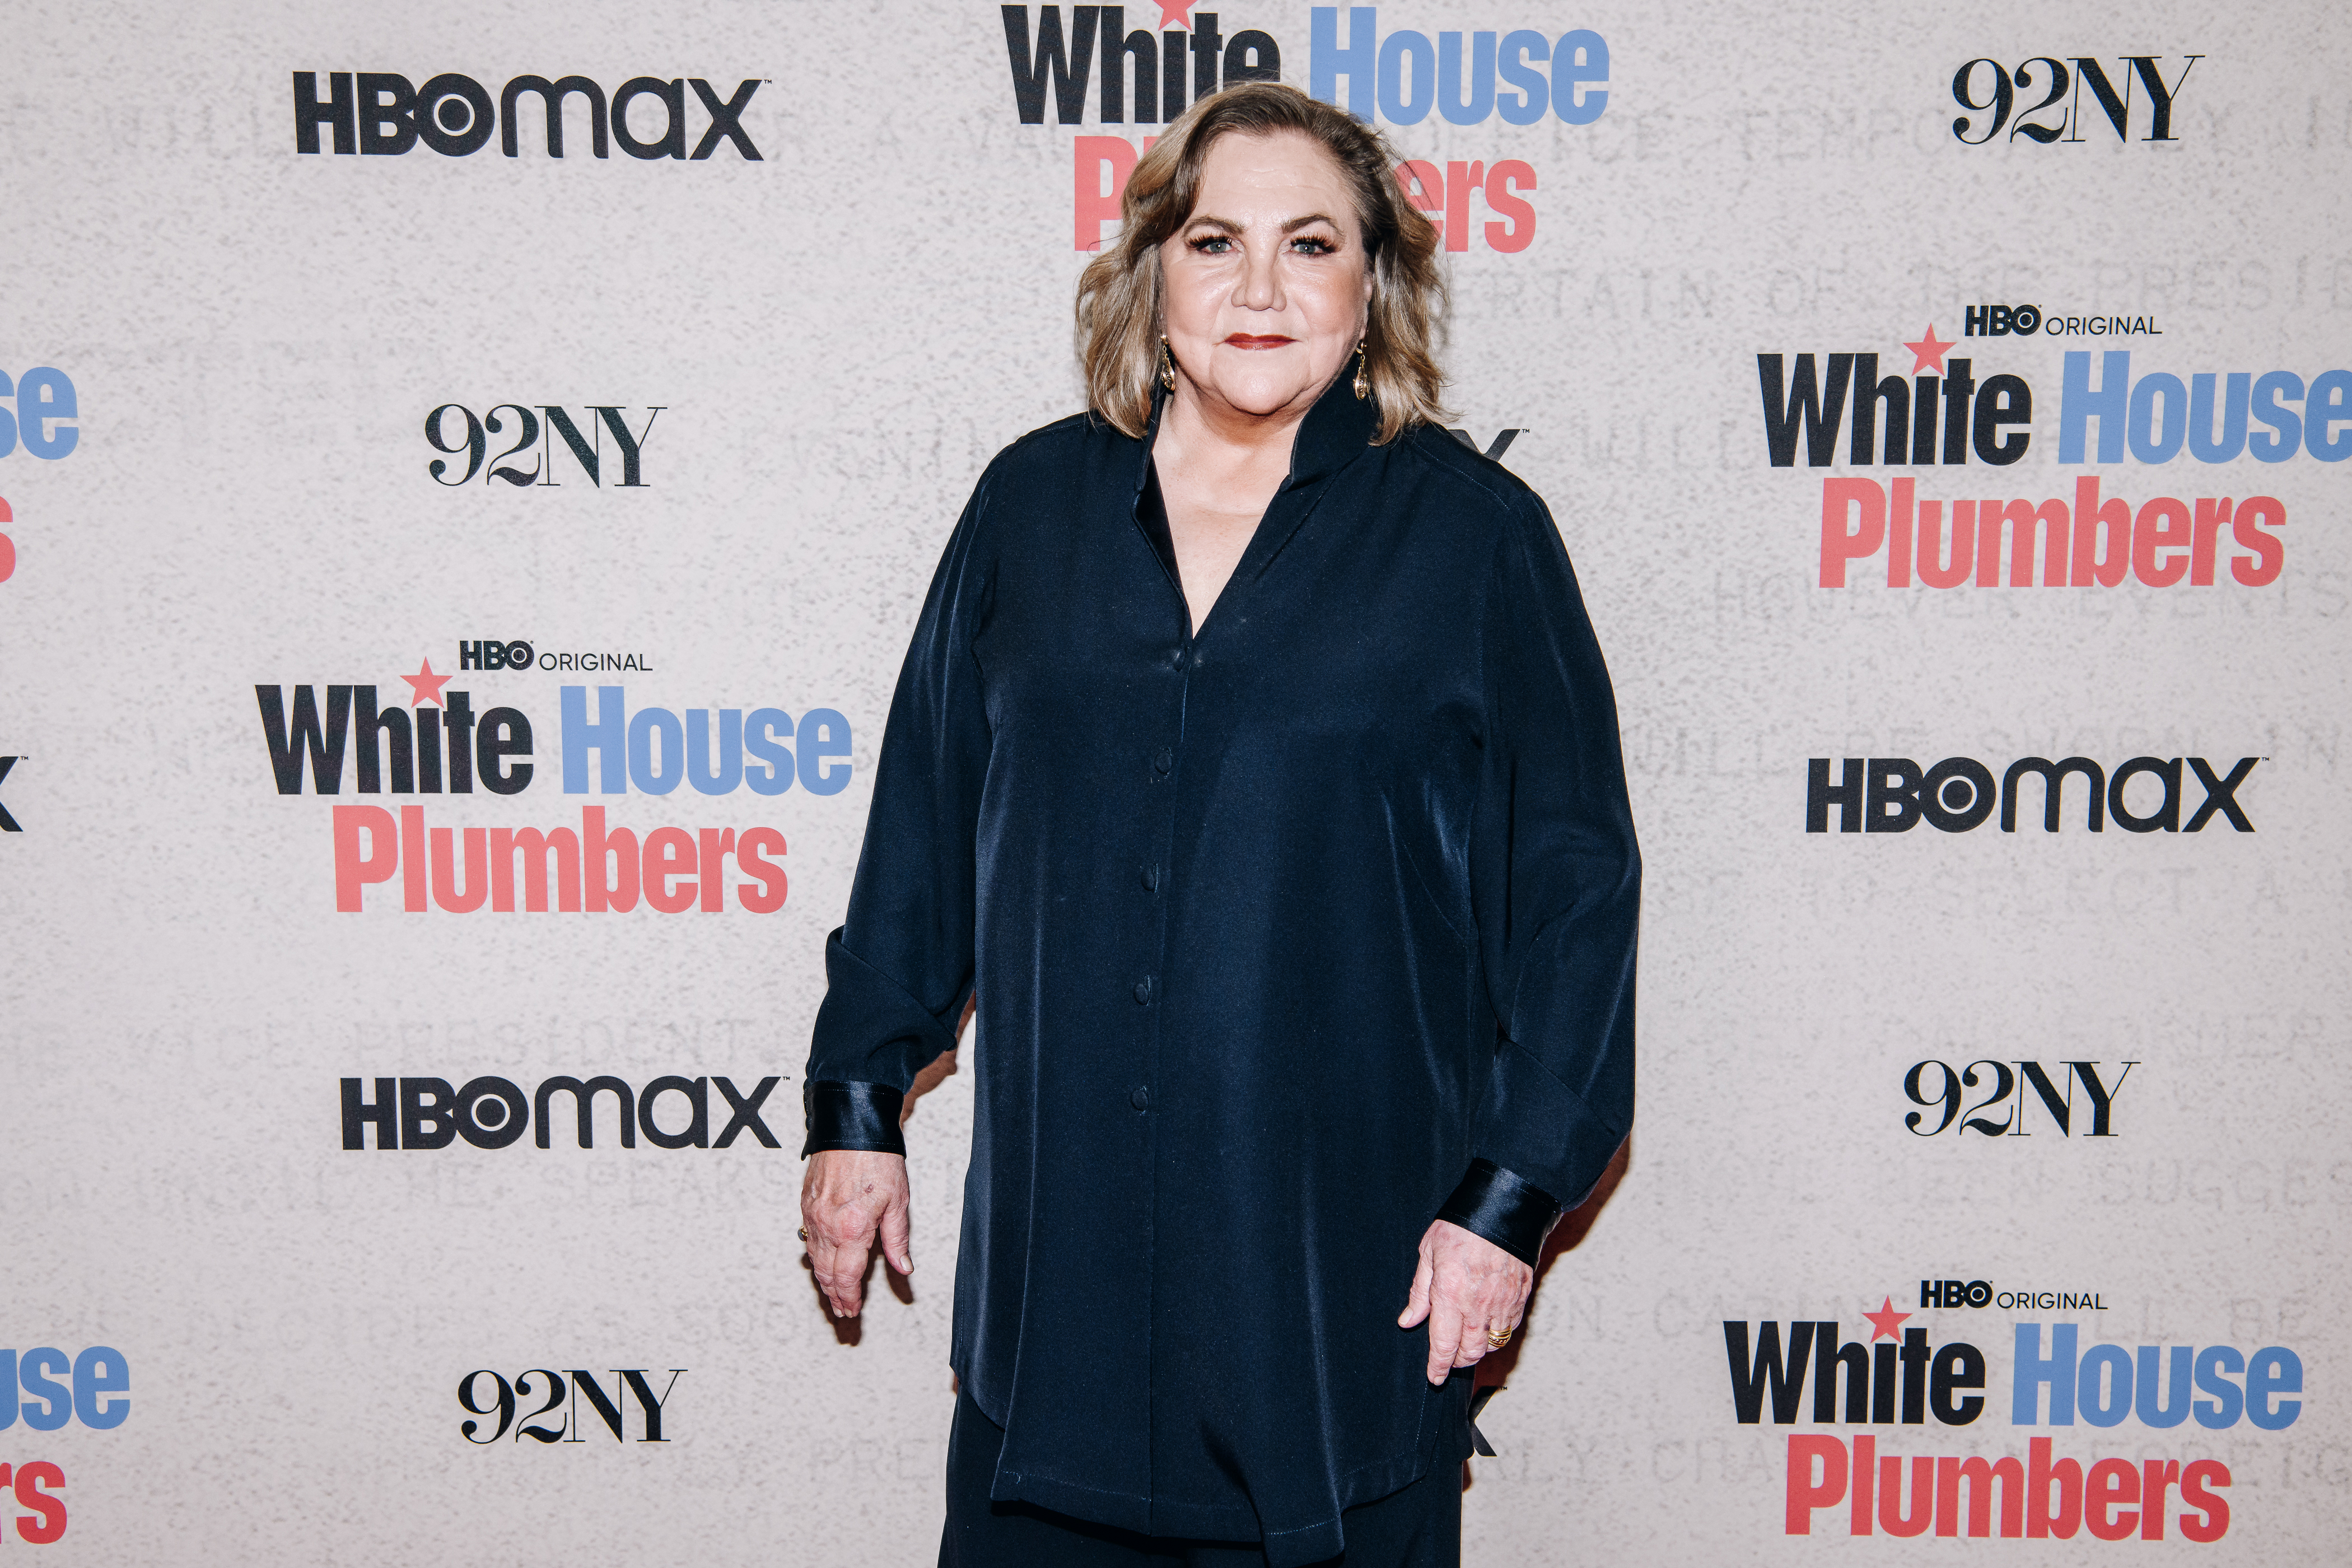 Kathleen Turner at the premiere of "White House Plumbers" held at the 92nd Street Y on April 17, 2023 in New York City. | Source: Getty Images